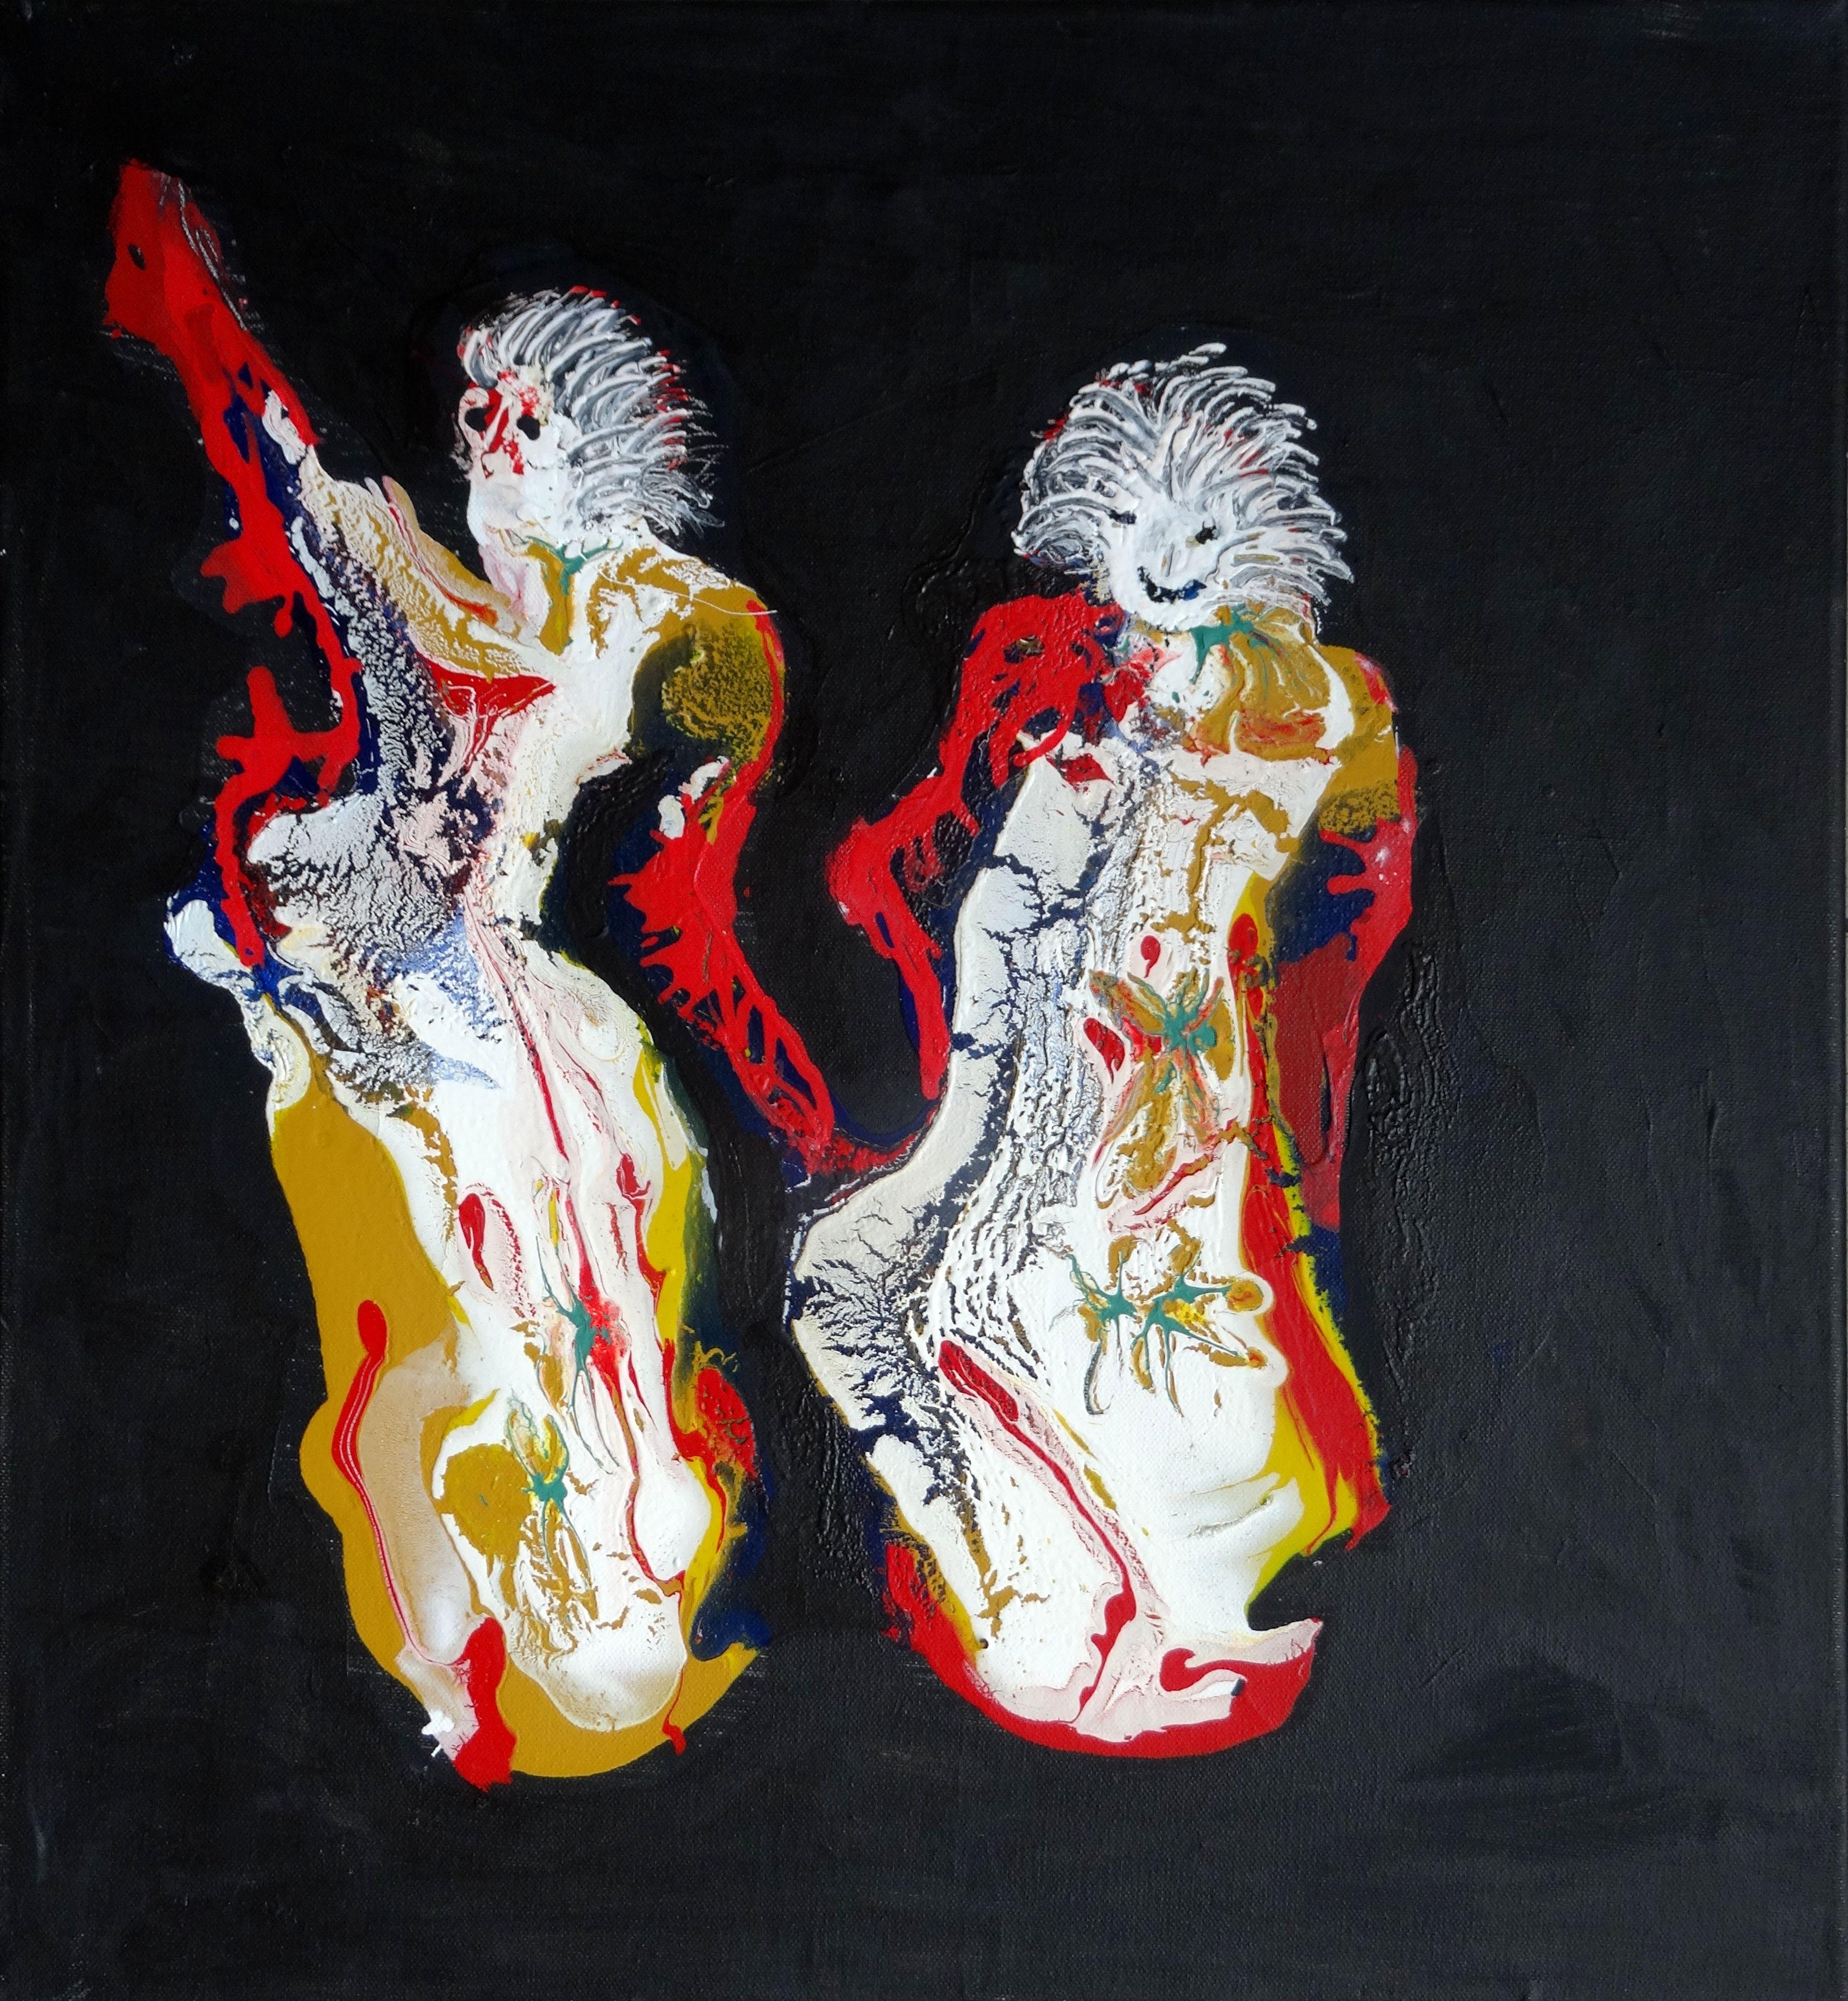 Alexander Lozovoy Figurative Painting - Banzai. Two abstract figures in Chinese style. 2018. Canvas, acrylic, 60x55 cm